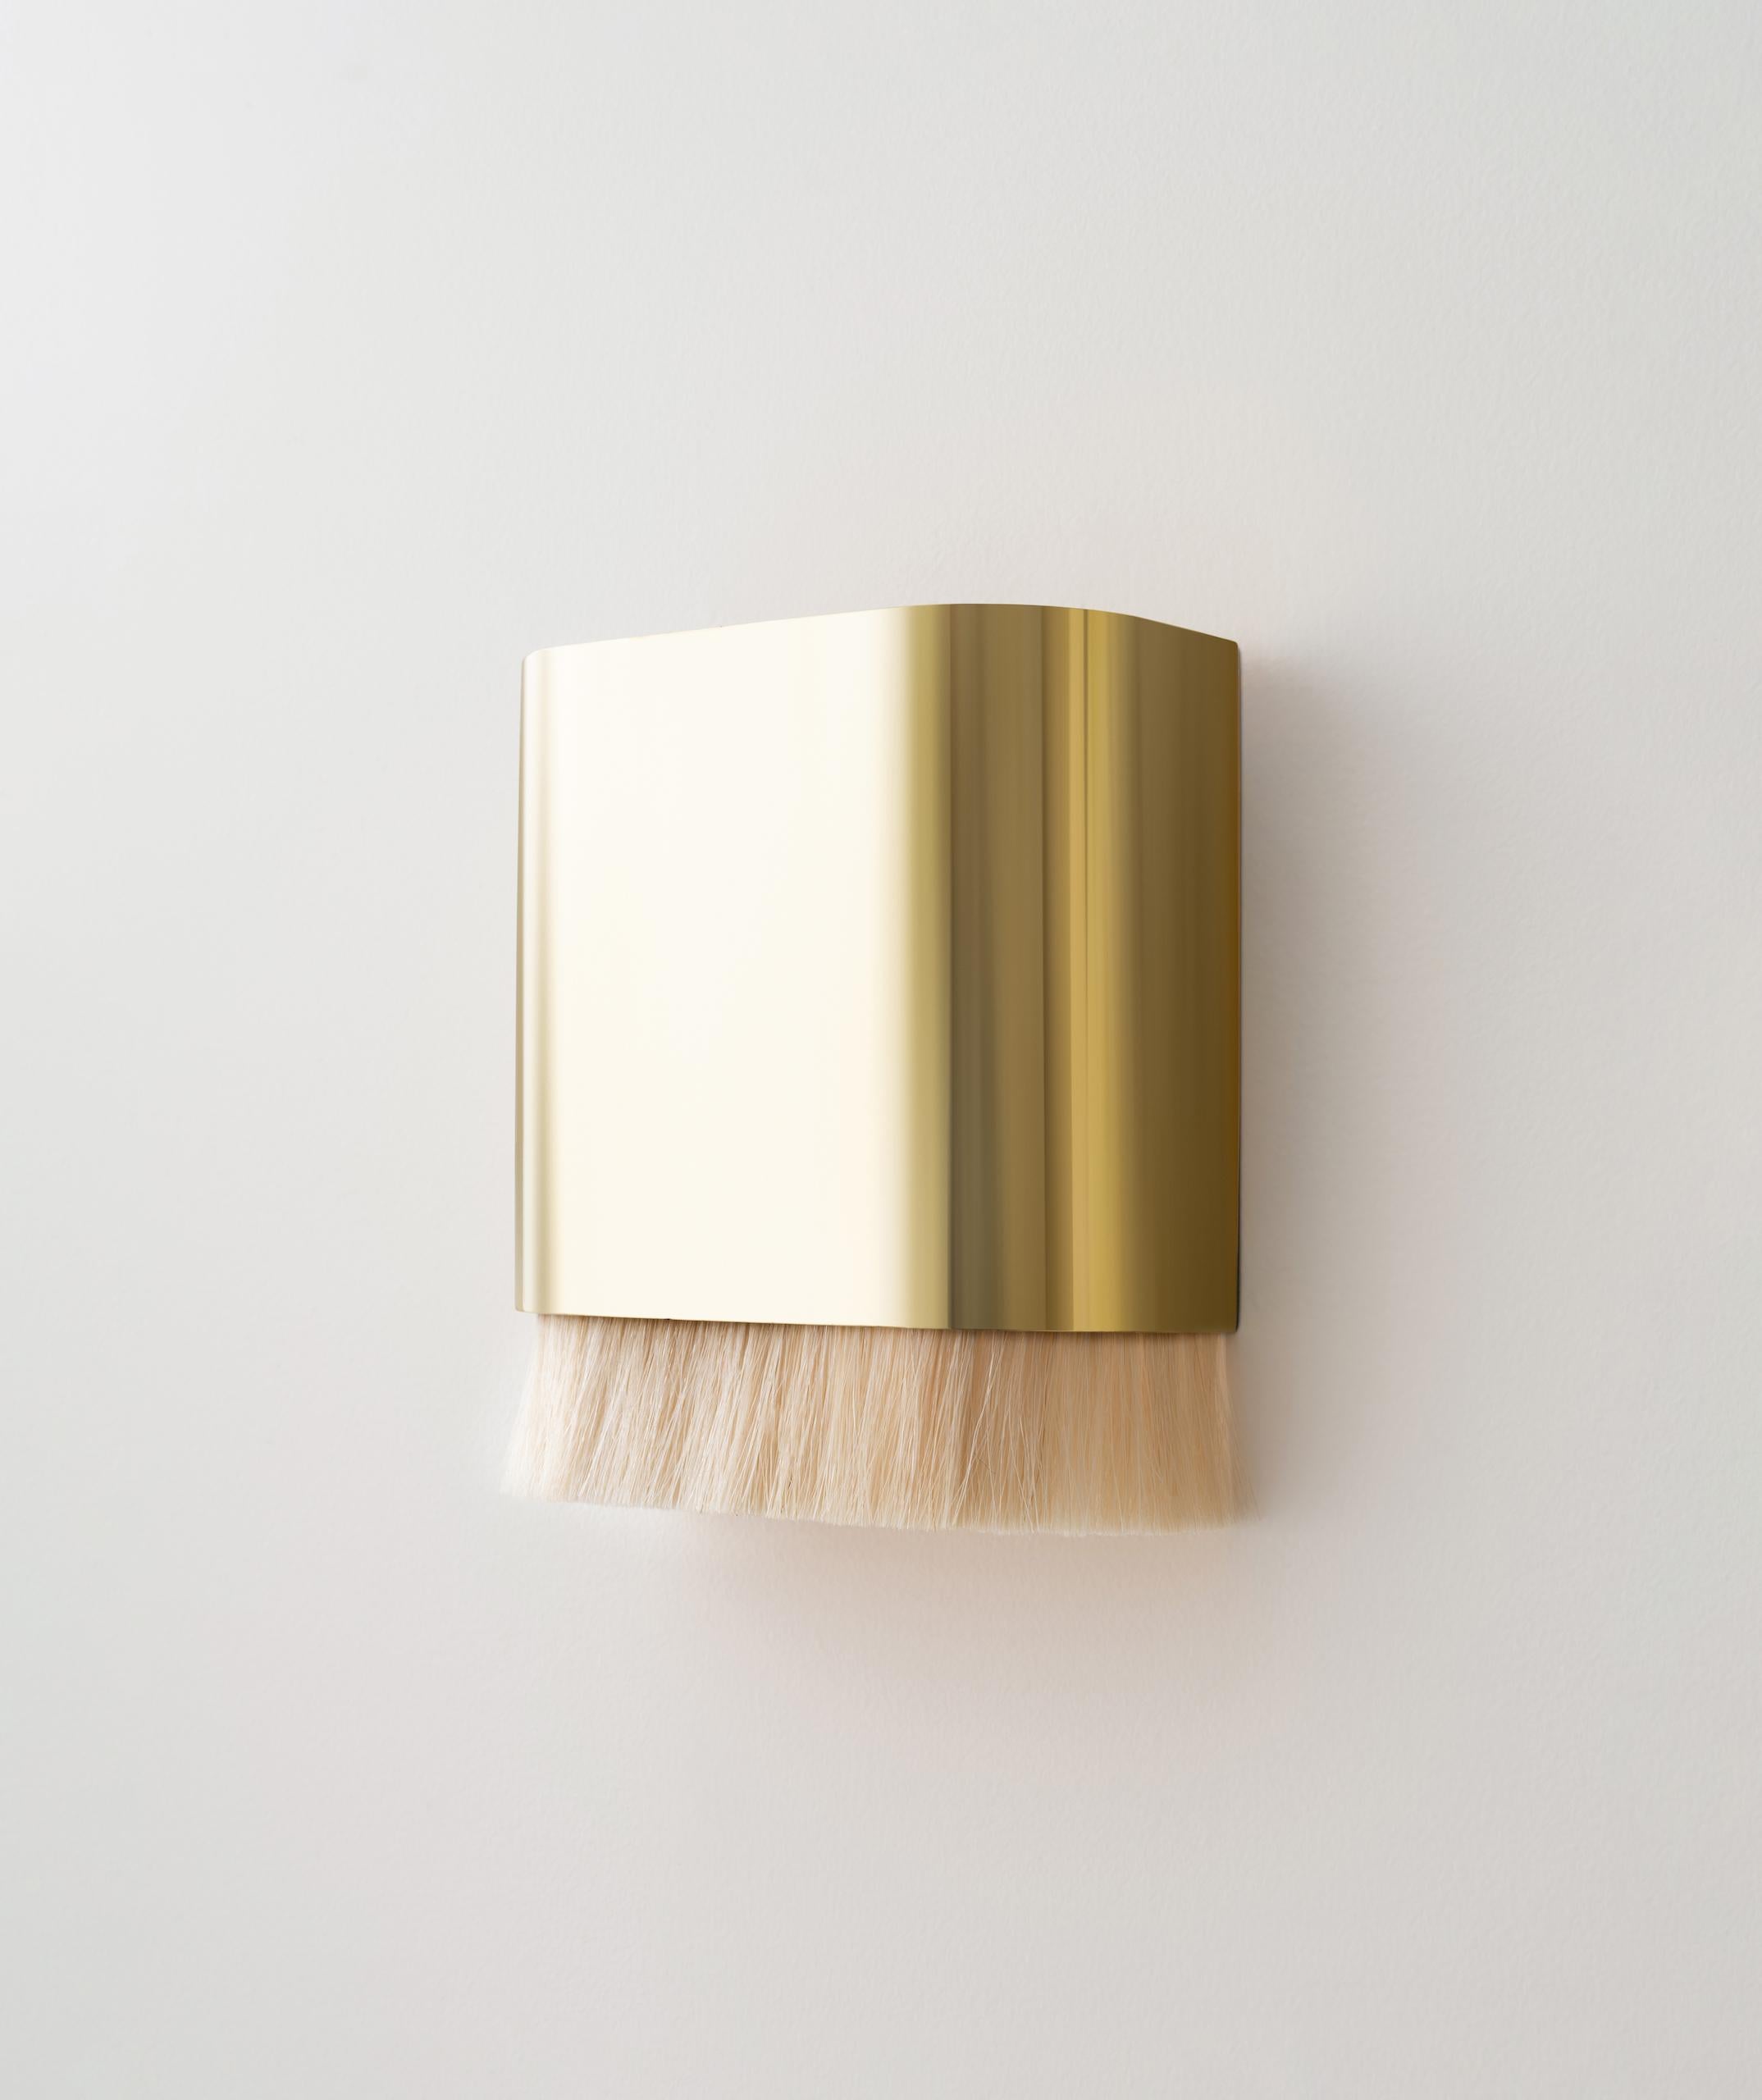 The Equus Sconce features hand-finished brass with a horse hair trim, creating a gentle glow of light. This pairing showcases a balance between contrasting textures and characteristics — horse hair appears soft and malleable but is coarse to the